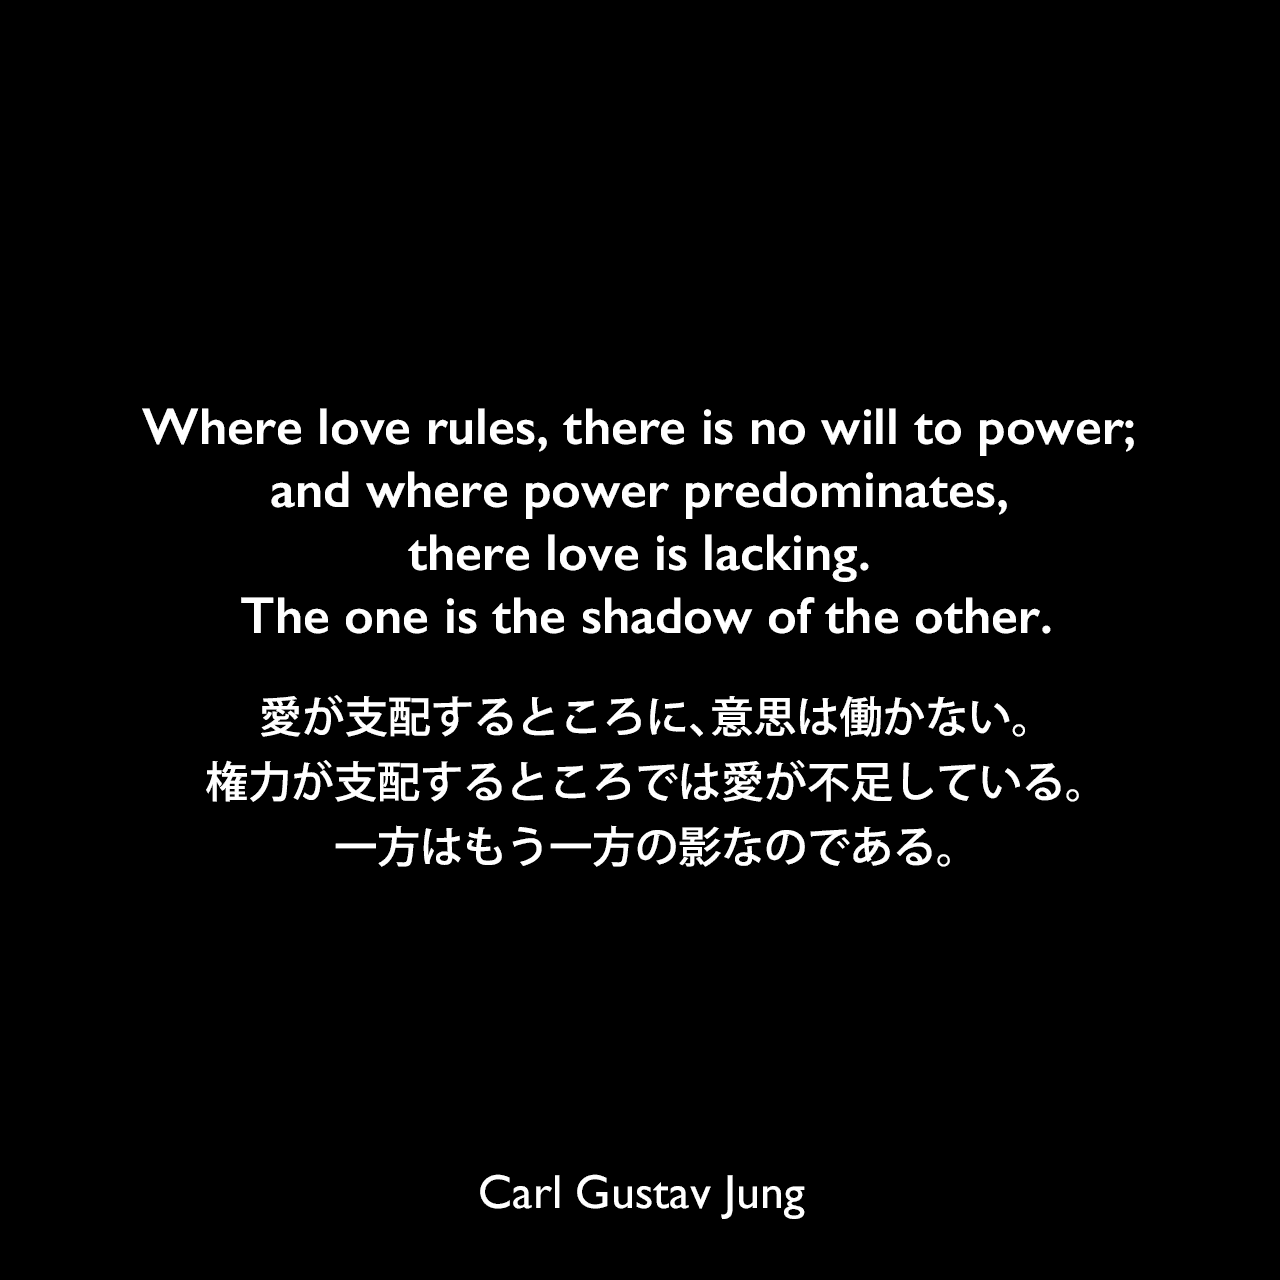 Where love rules, there is no will to power; and where power predominates, there love is lacking. The one is the shadow of the other.愛が支配するところに、意思は働かない。権力が支配するところでは愛が不足している。一方はもう一方の影なのである。- ユングによる本「Psychology of the Unconscious」よりCarl Gustav Jung